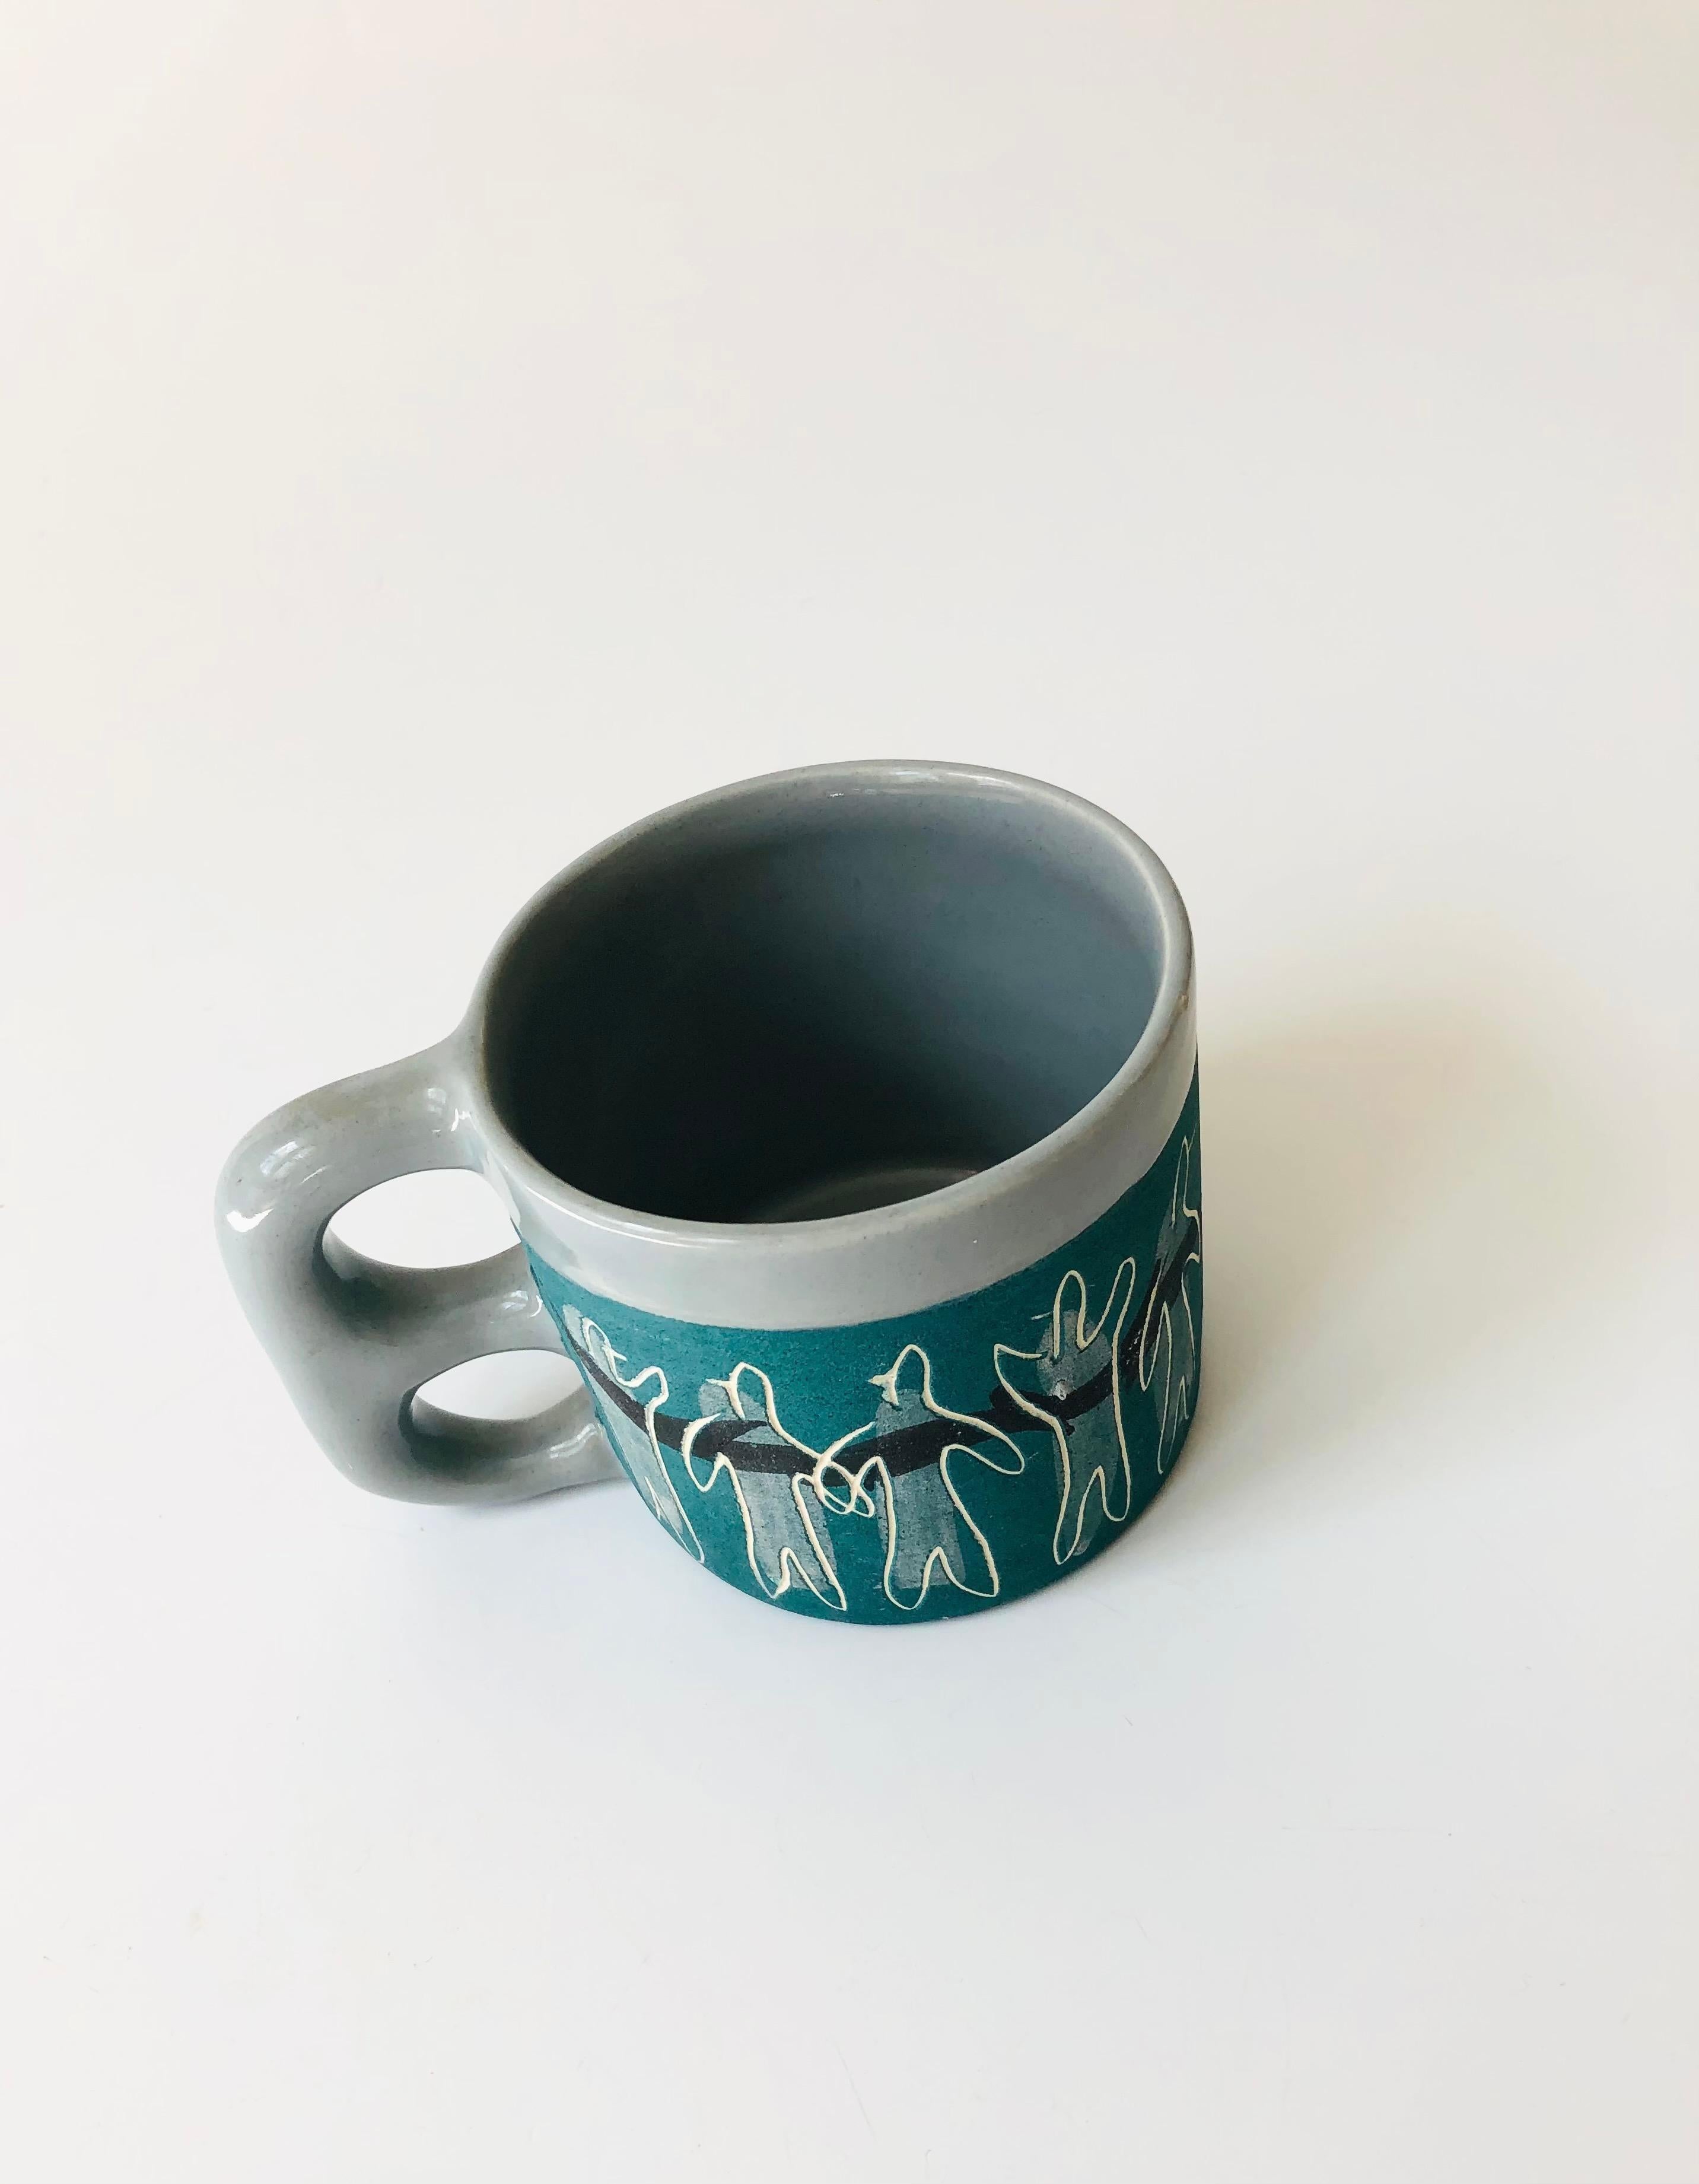 A wonderful midcentury studio pottery mug from the 1940s-1950s by ceramicist, Alice Smith of California. Decorated with a series of figures carved into the sides of the mug. Finished in a matte green glaze with a glossy gray glaze at the handle,